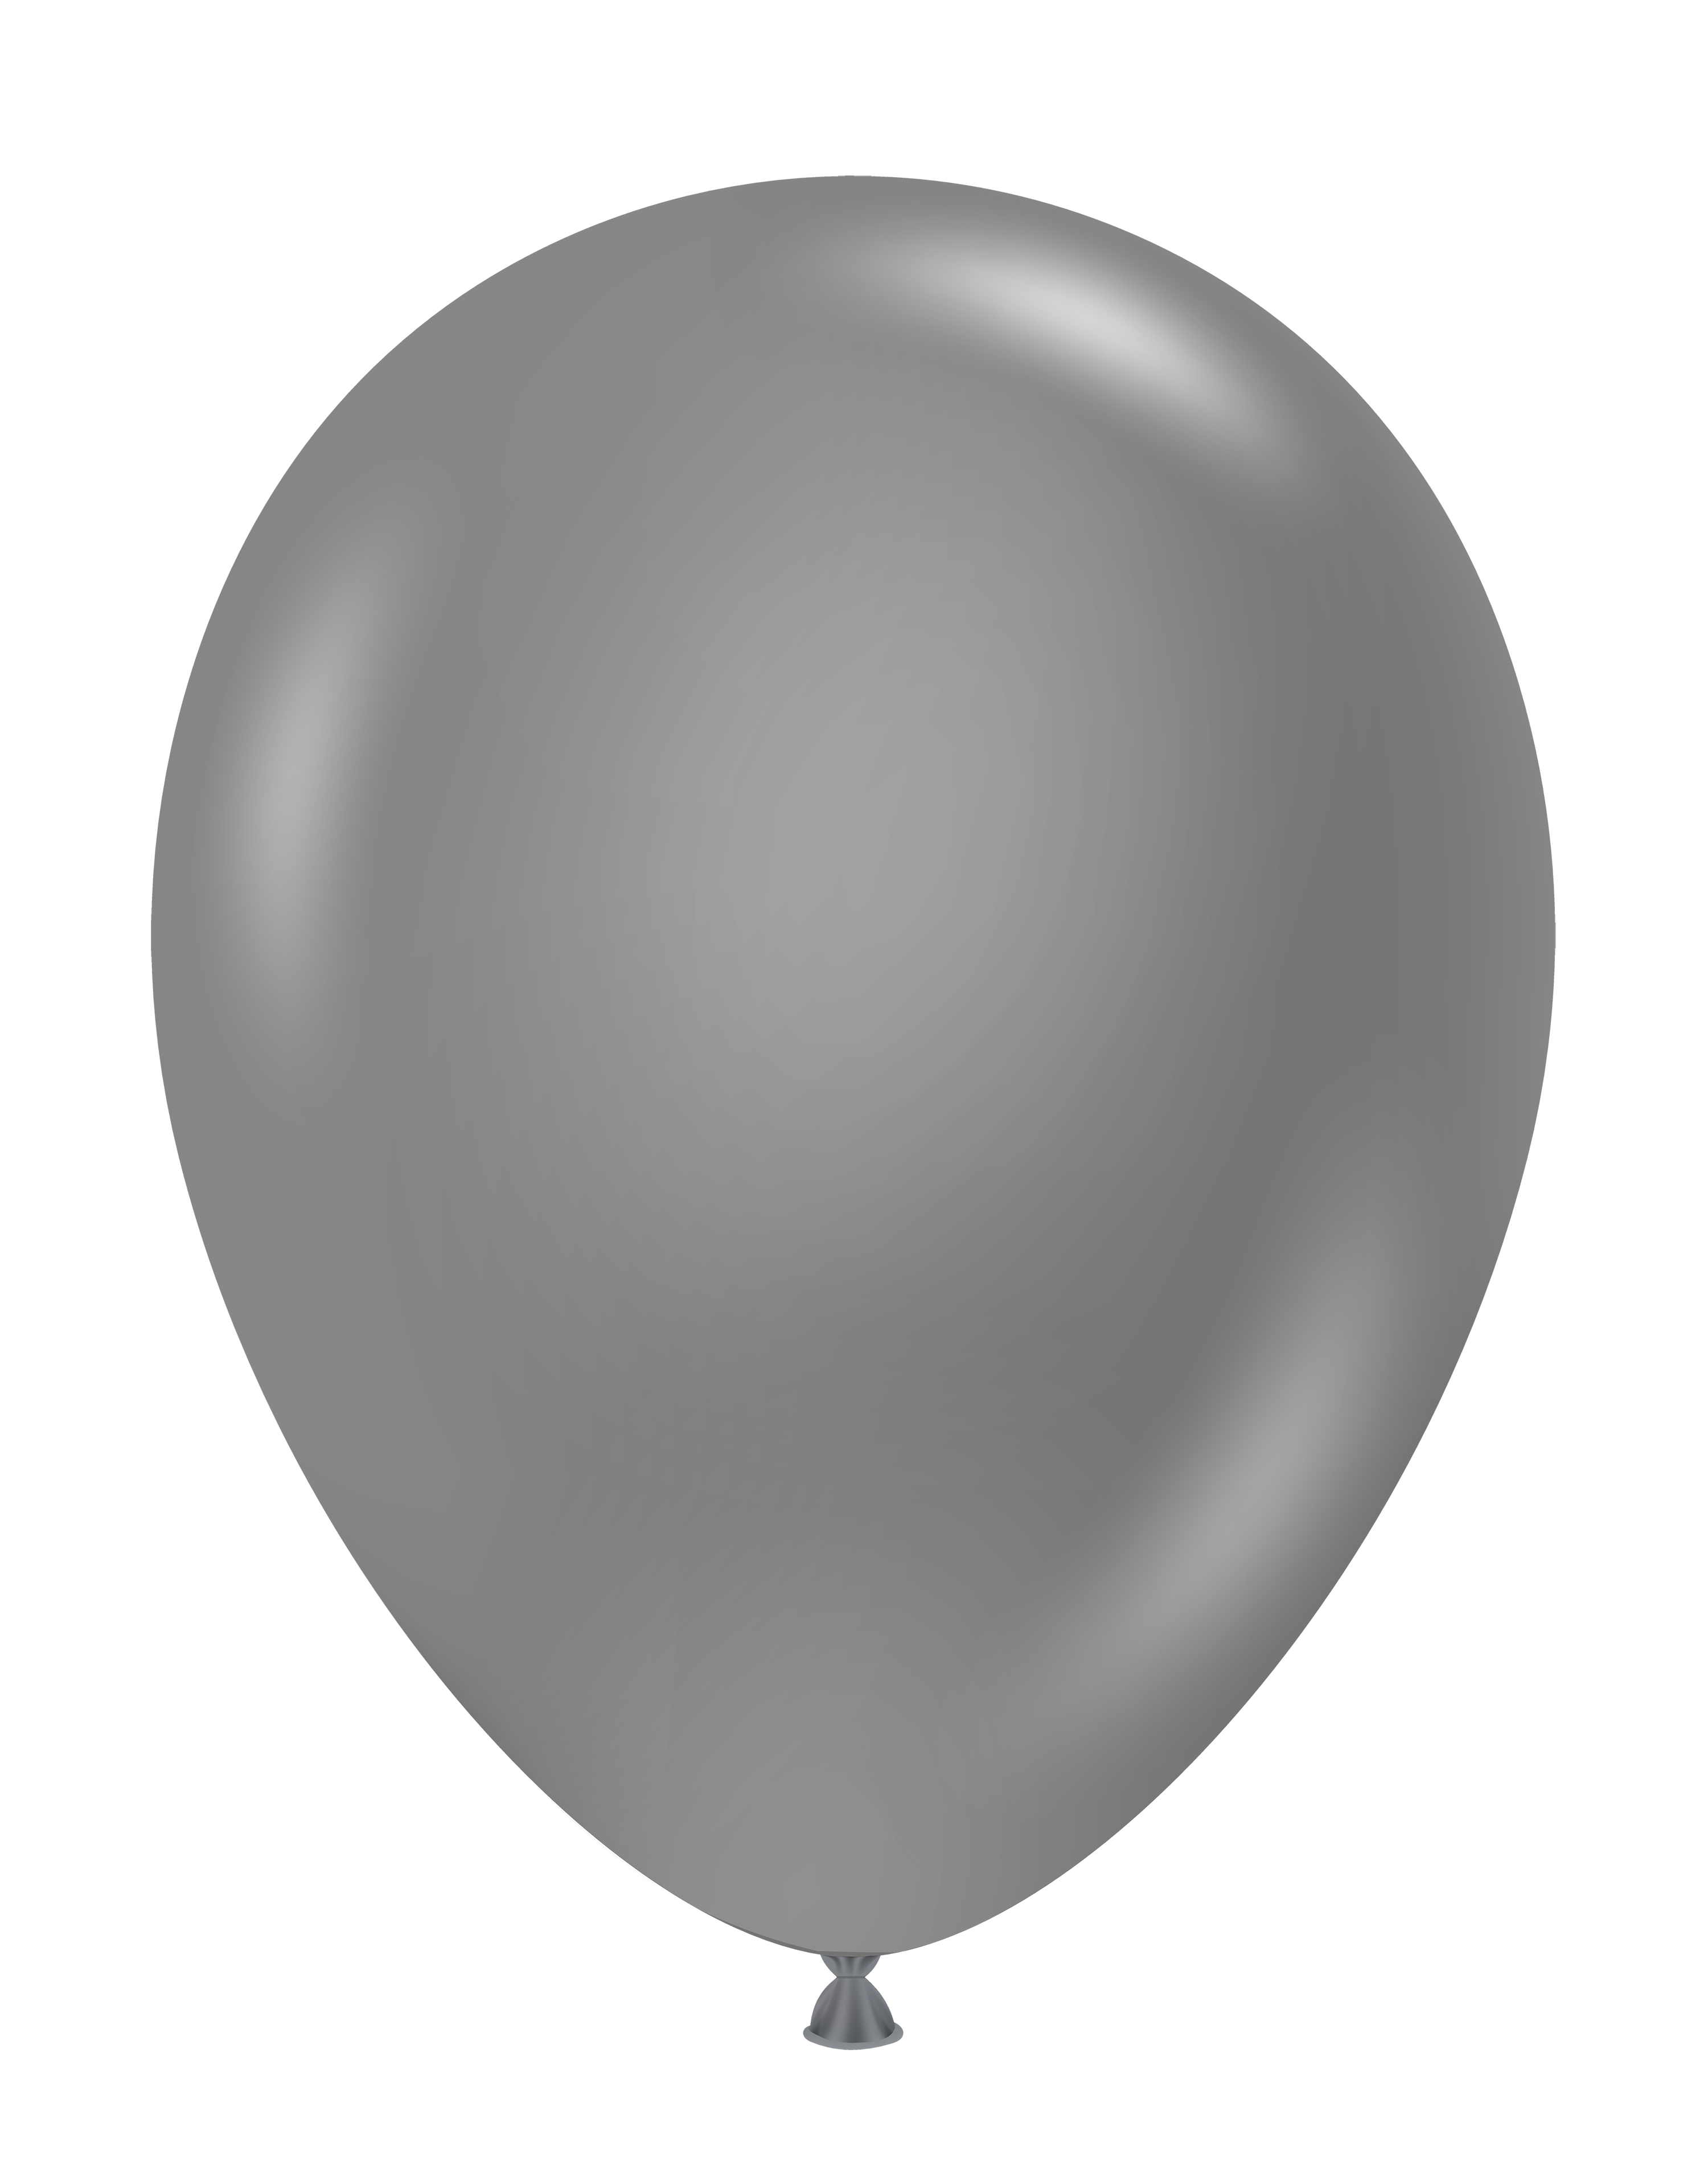 11" TUFTEX Metallic Pearlized Silver Latex Balloons | 100 Count